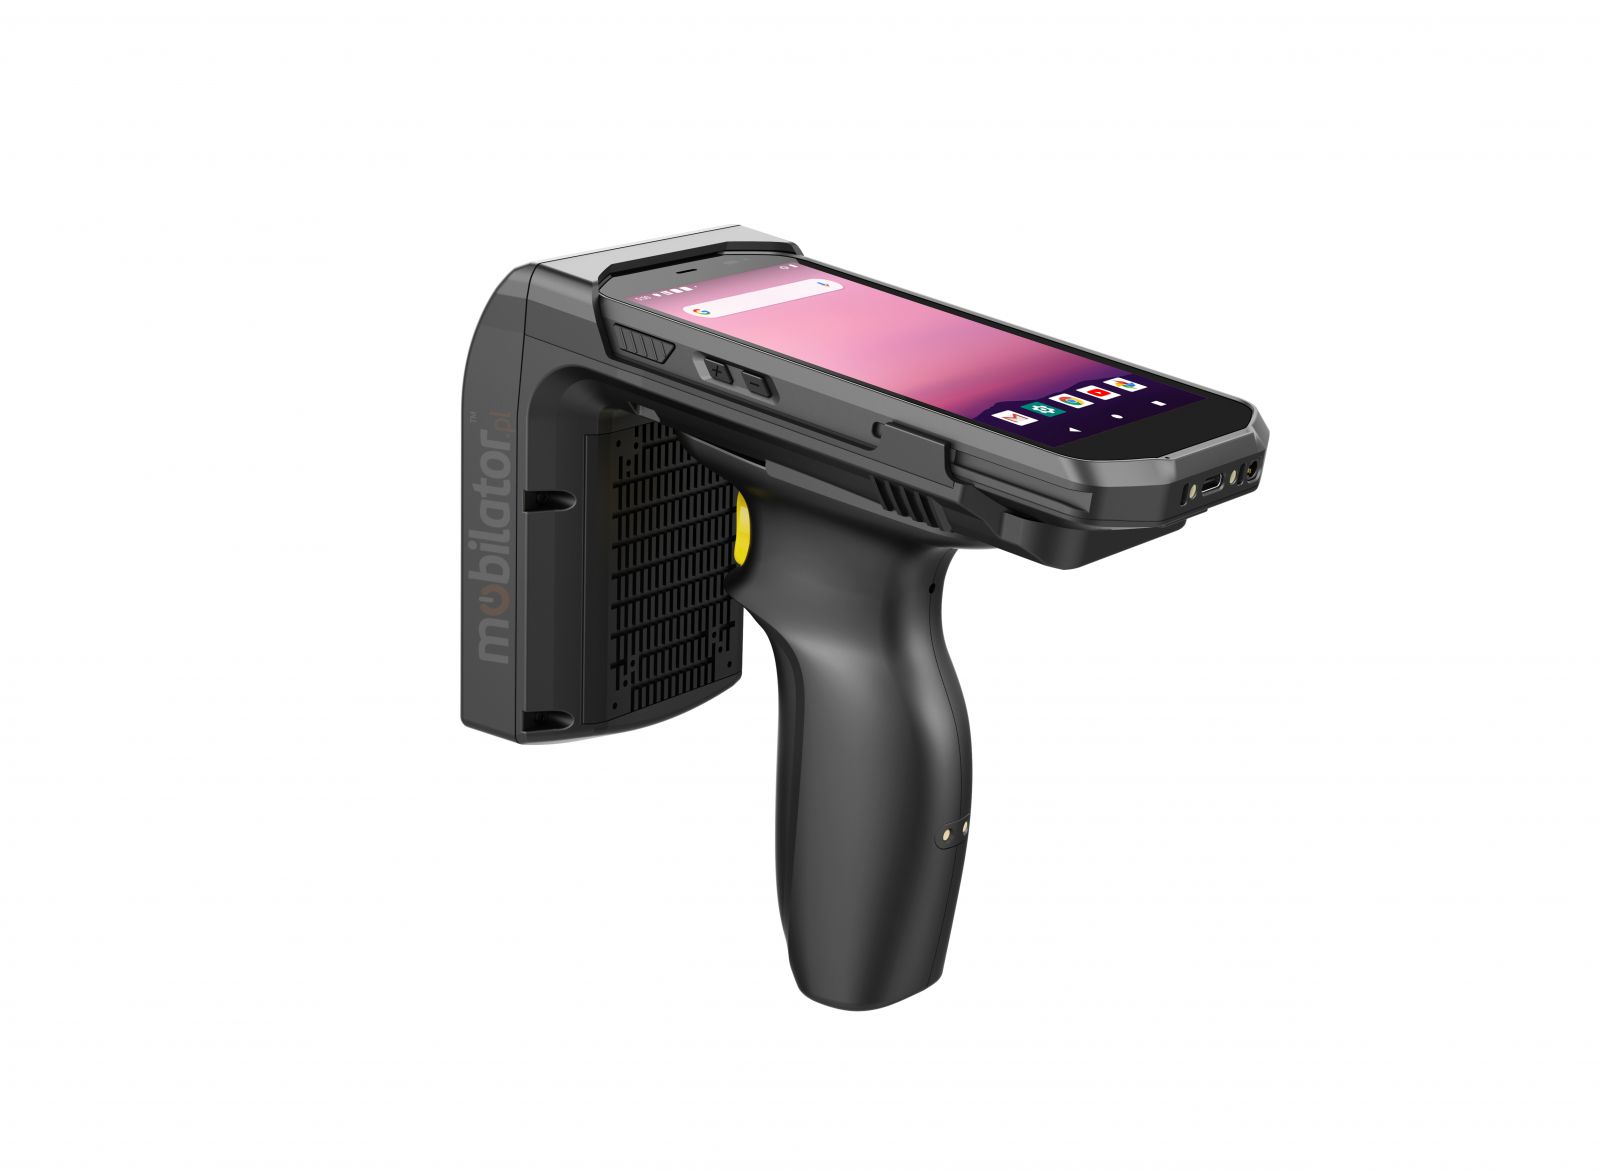 Mobipad Qxtron Q5100 v.5 - Shockproof (IP65 + MIL-STD-810G) data terminal with Android 9.0 system and 2D and UHF code reader, 4GB RAM and 64GB disk capacity.